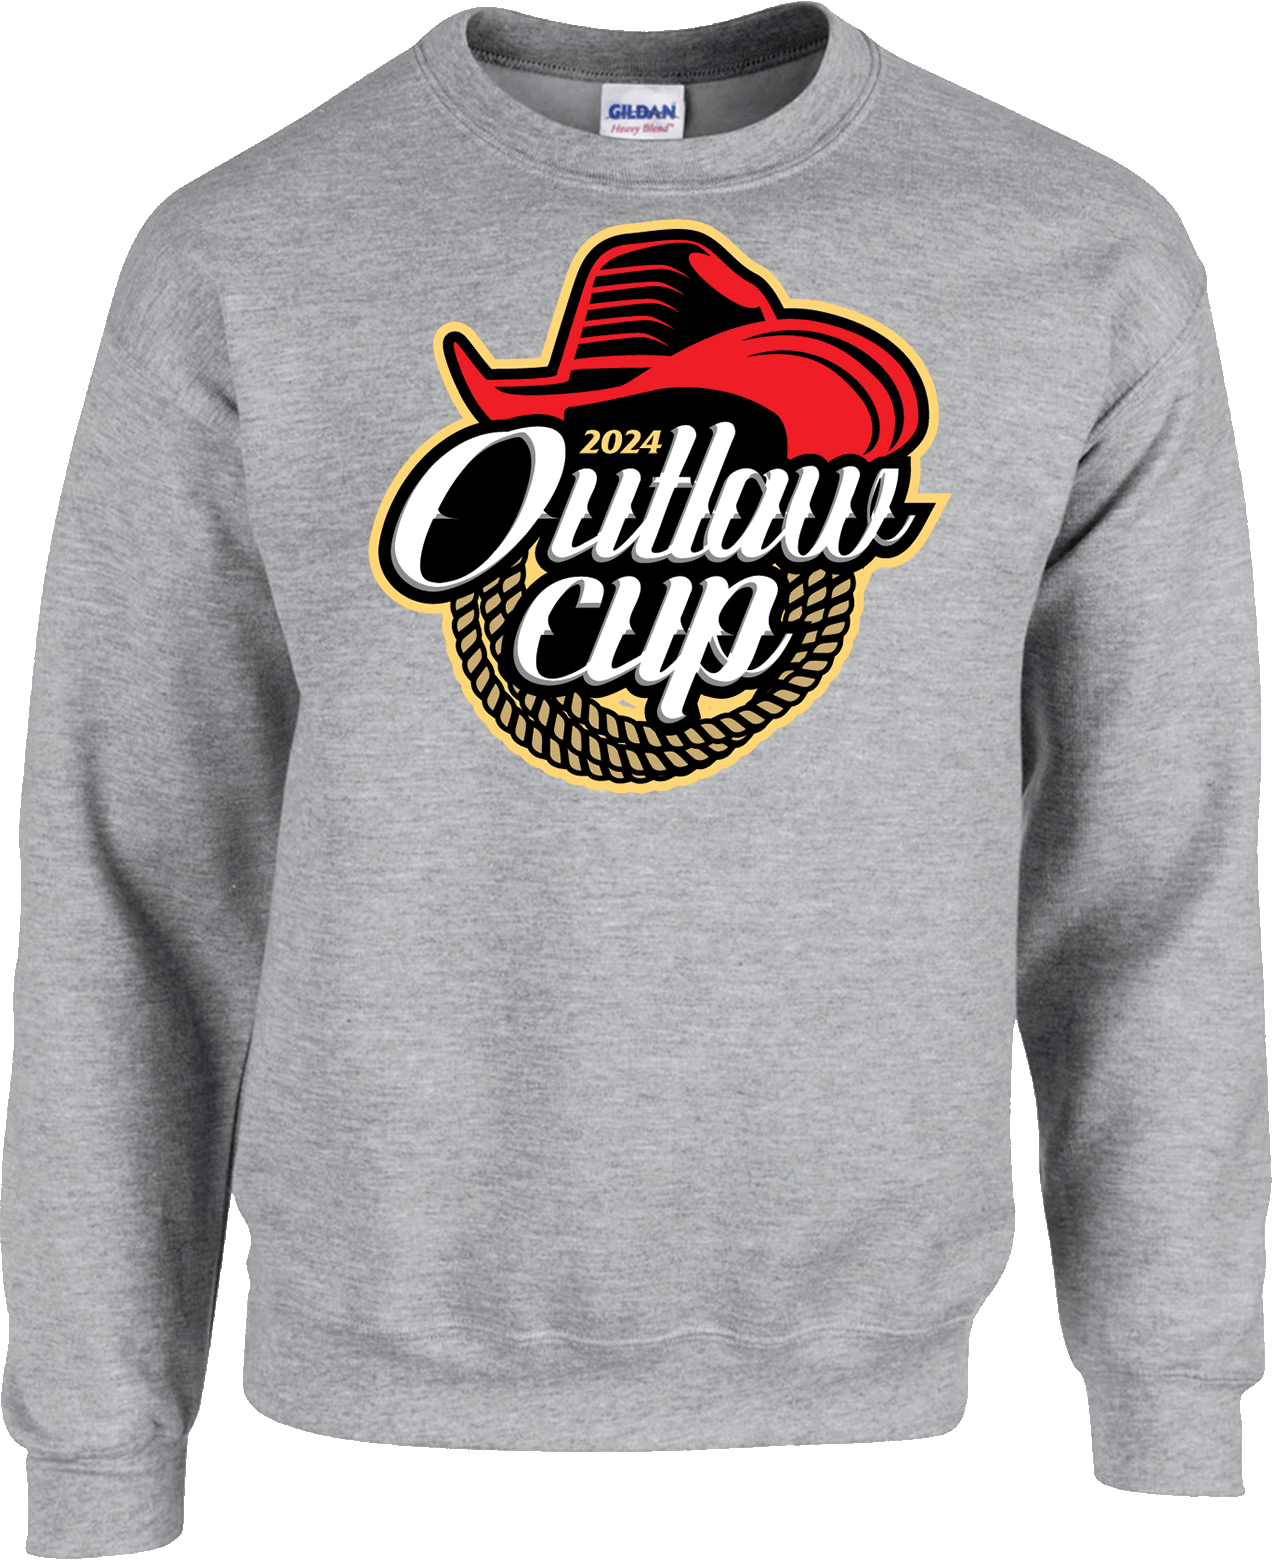 Crew Sweatershirt - 2024 Outlaw Cup